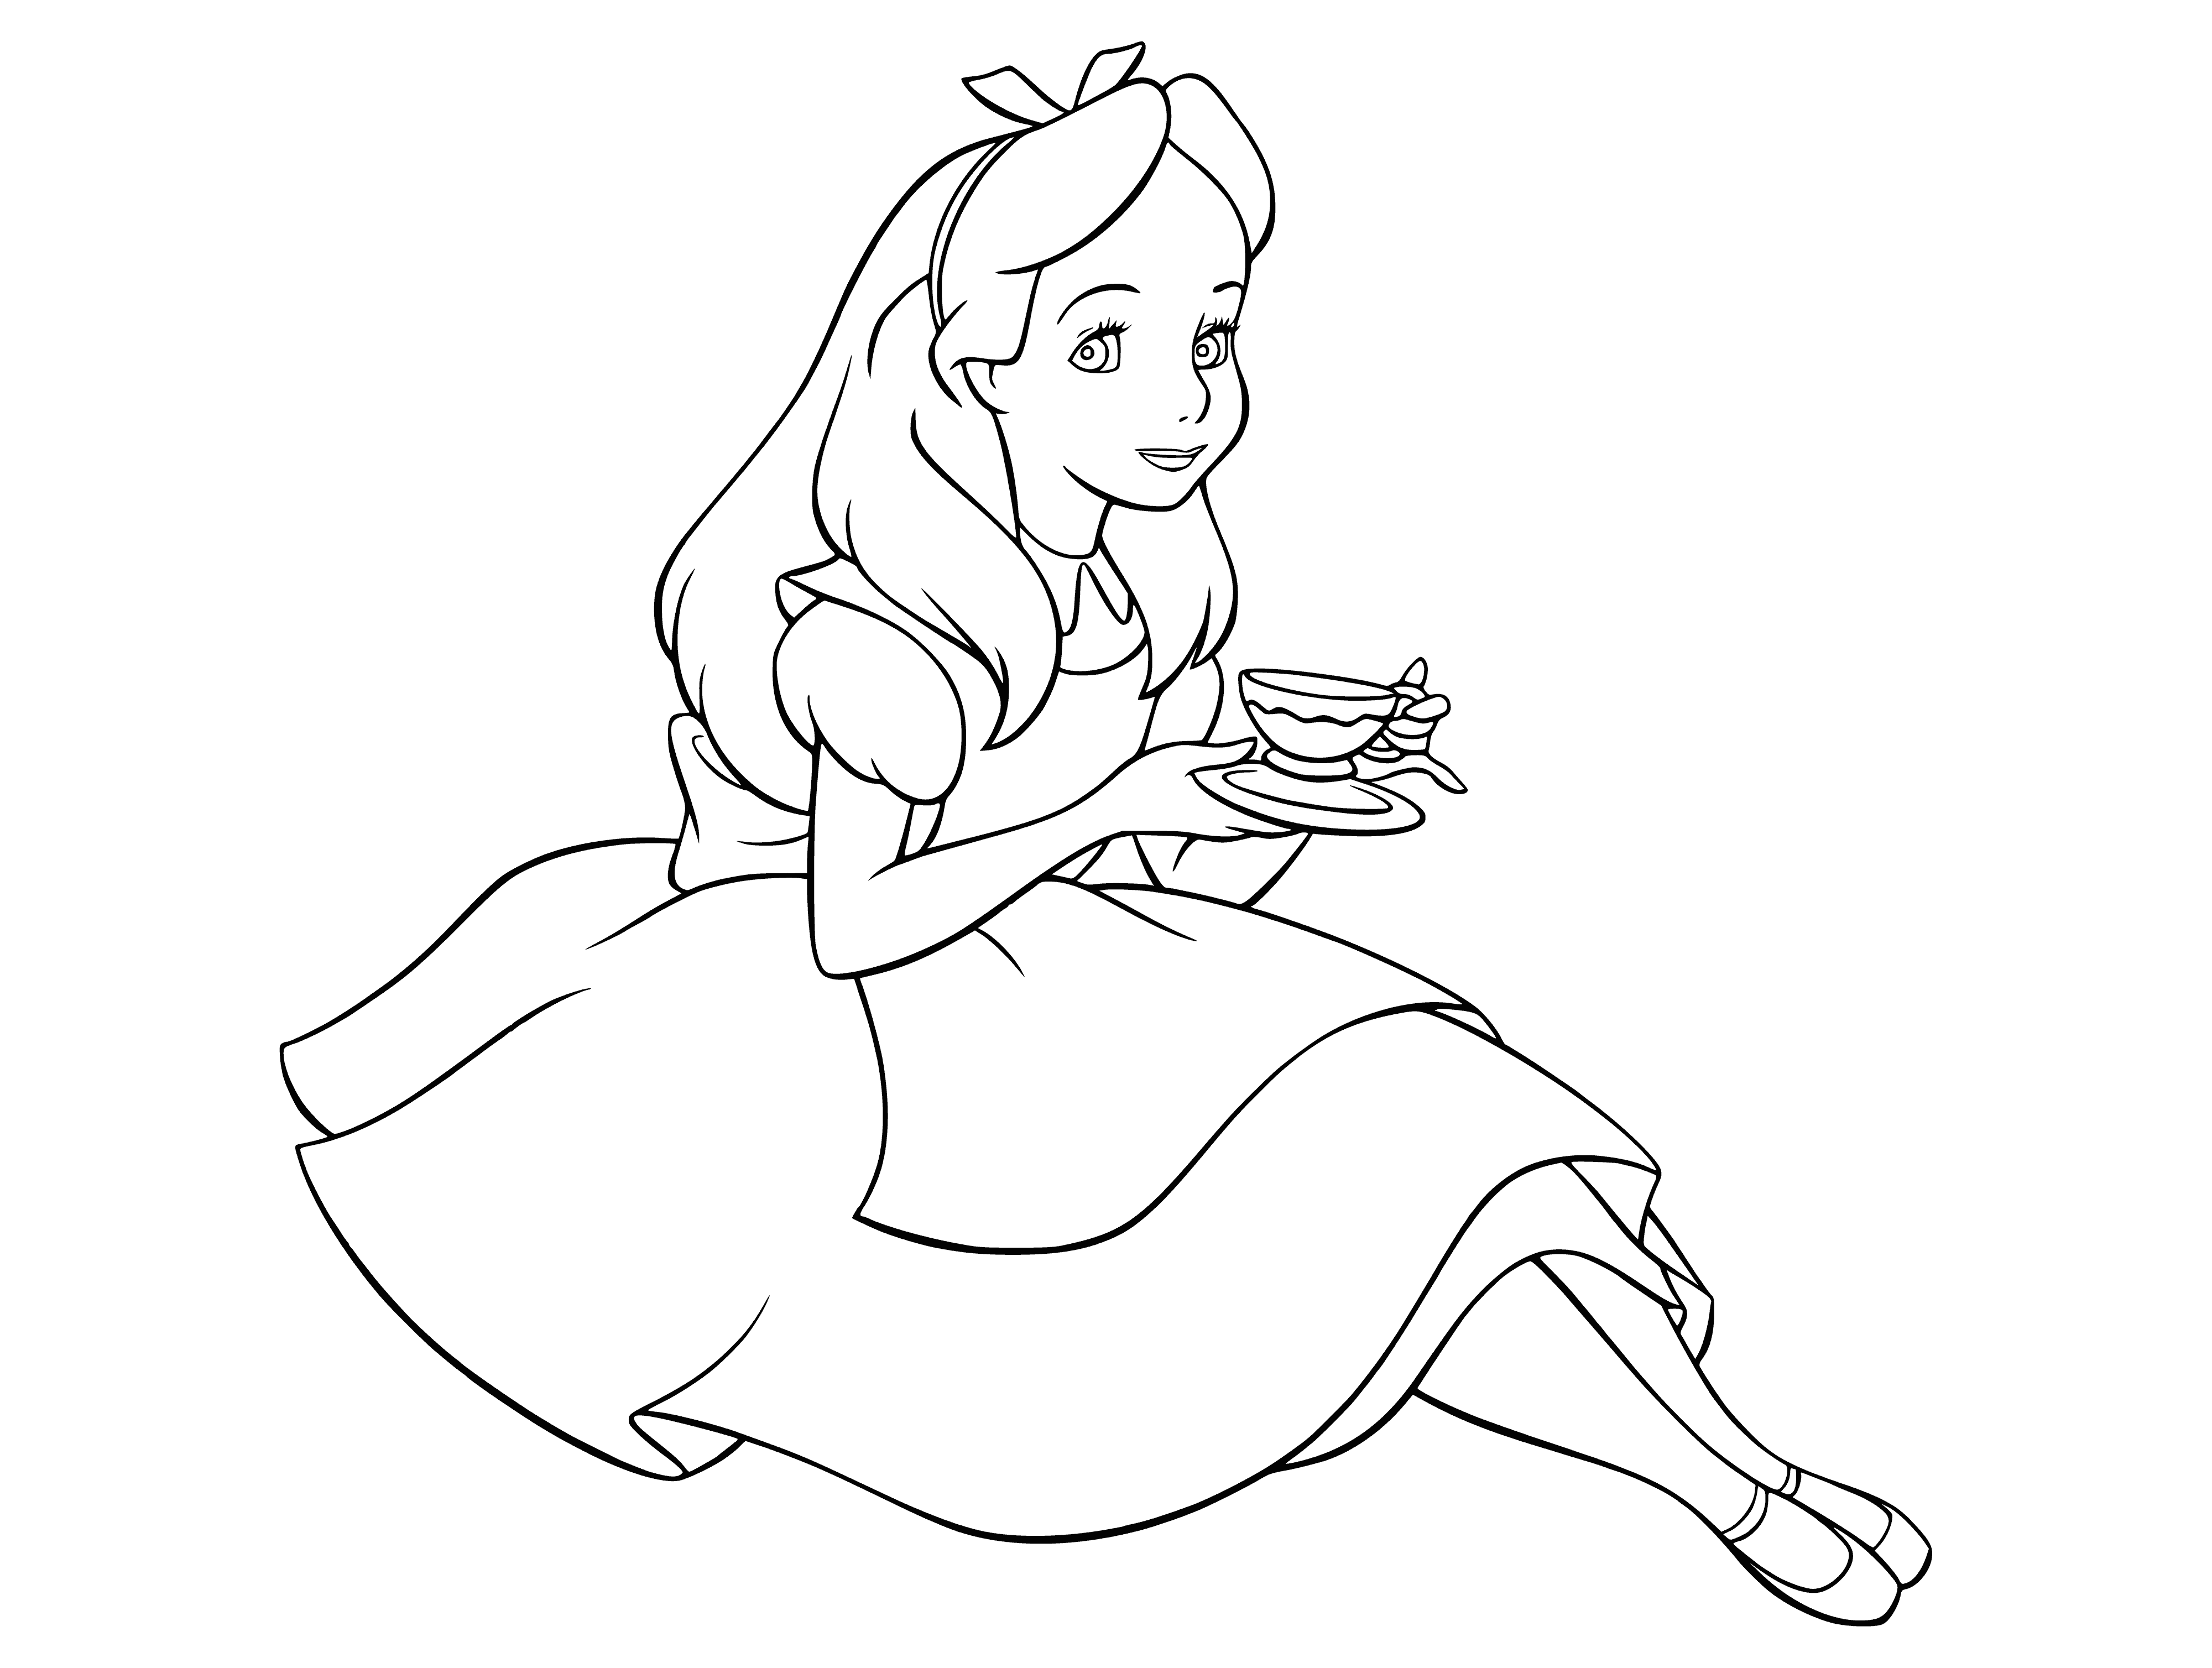 Alice with a cup in her hands coloring page